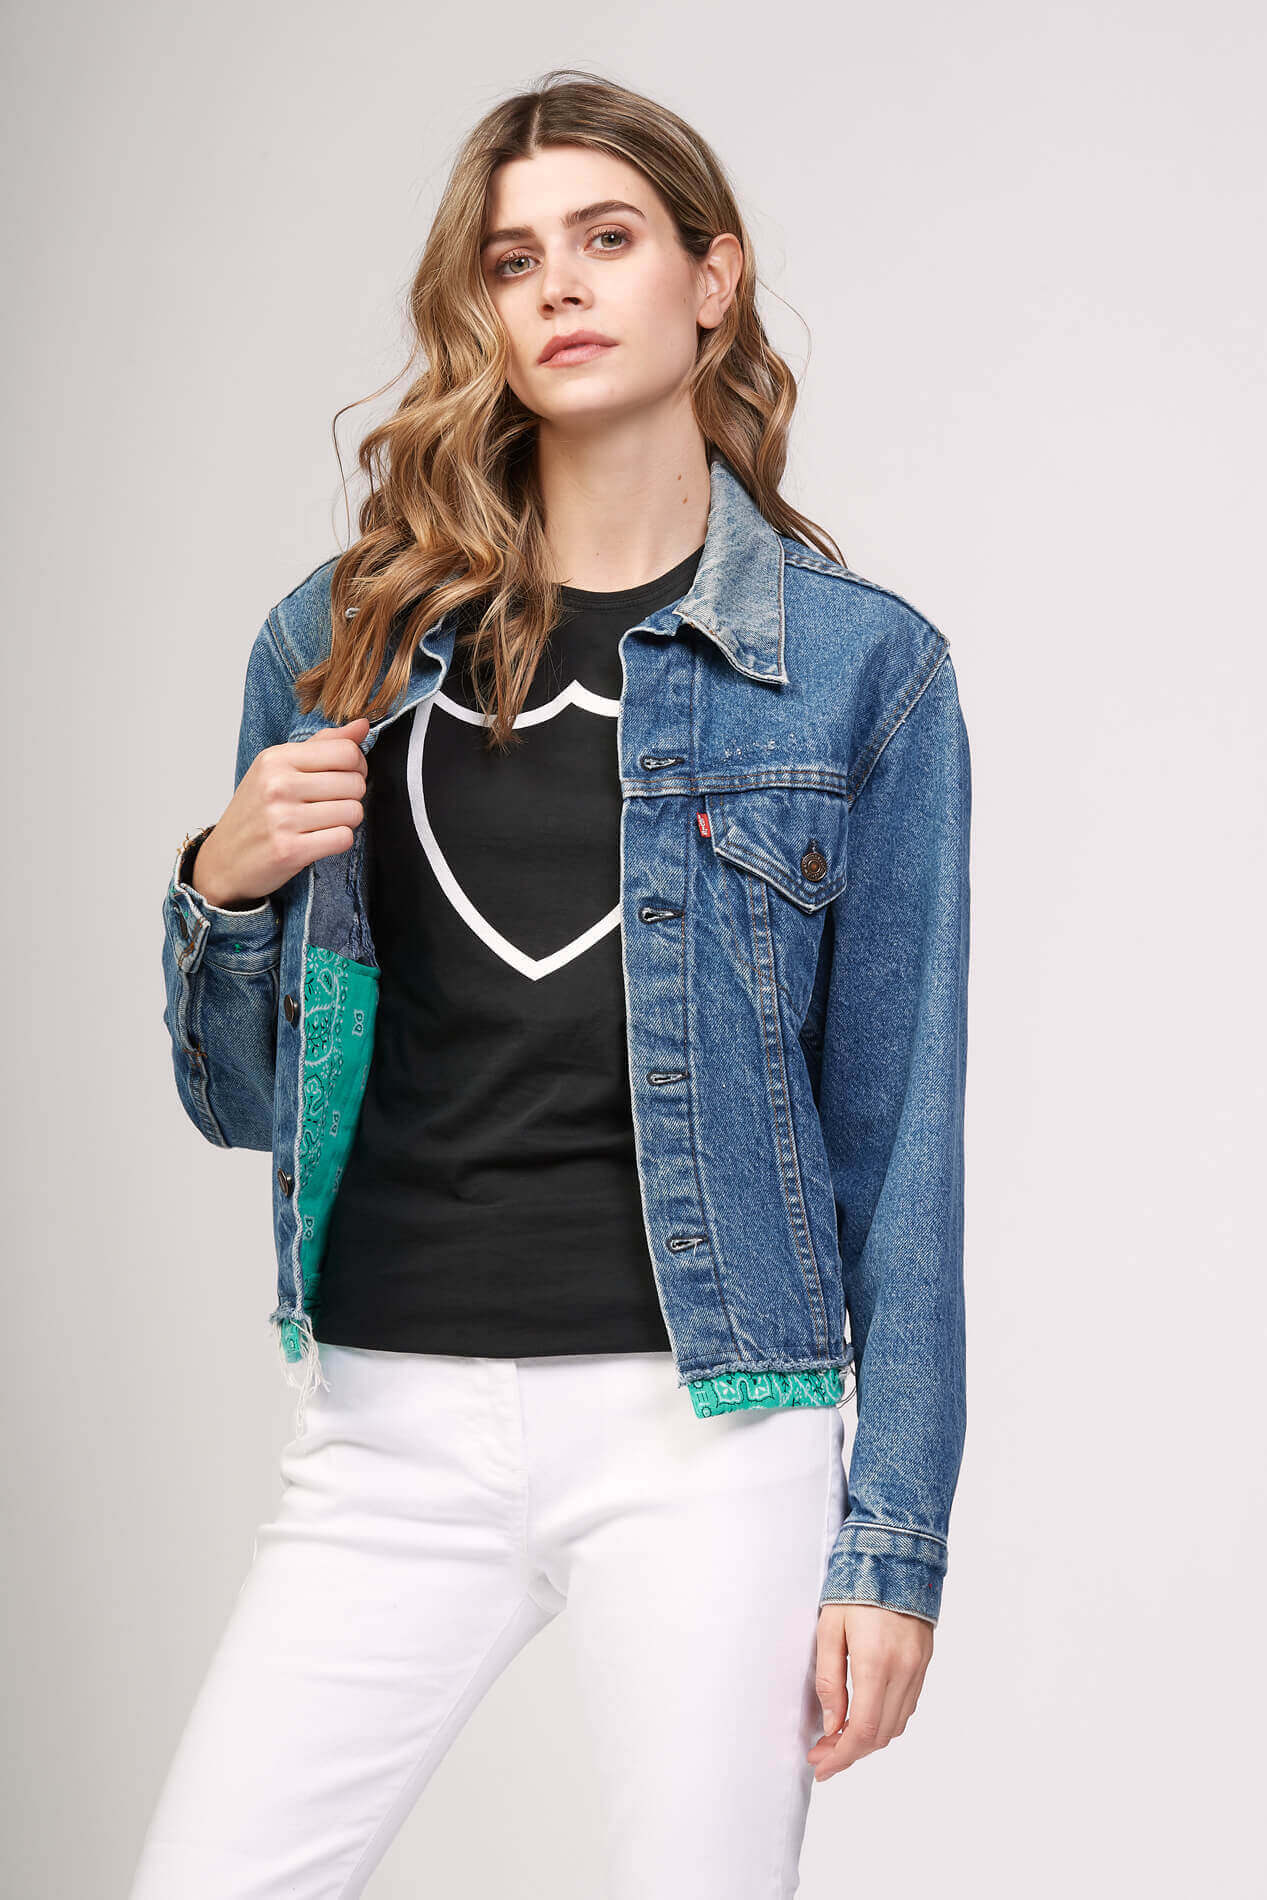 BANDANA DENIM JACKET Levi's vintage denim jacket. Customized jacket with vintage bandana applicated inside. Every piece is 'one of a kind', designed using handcrafted materials. As a result of this process there will be variations in the shade of the colo